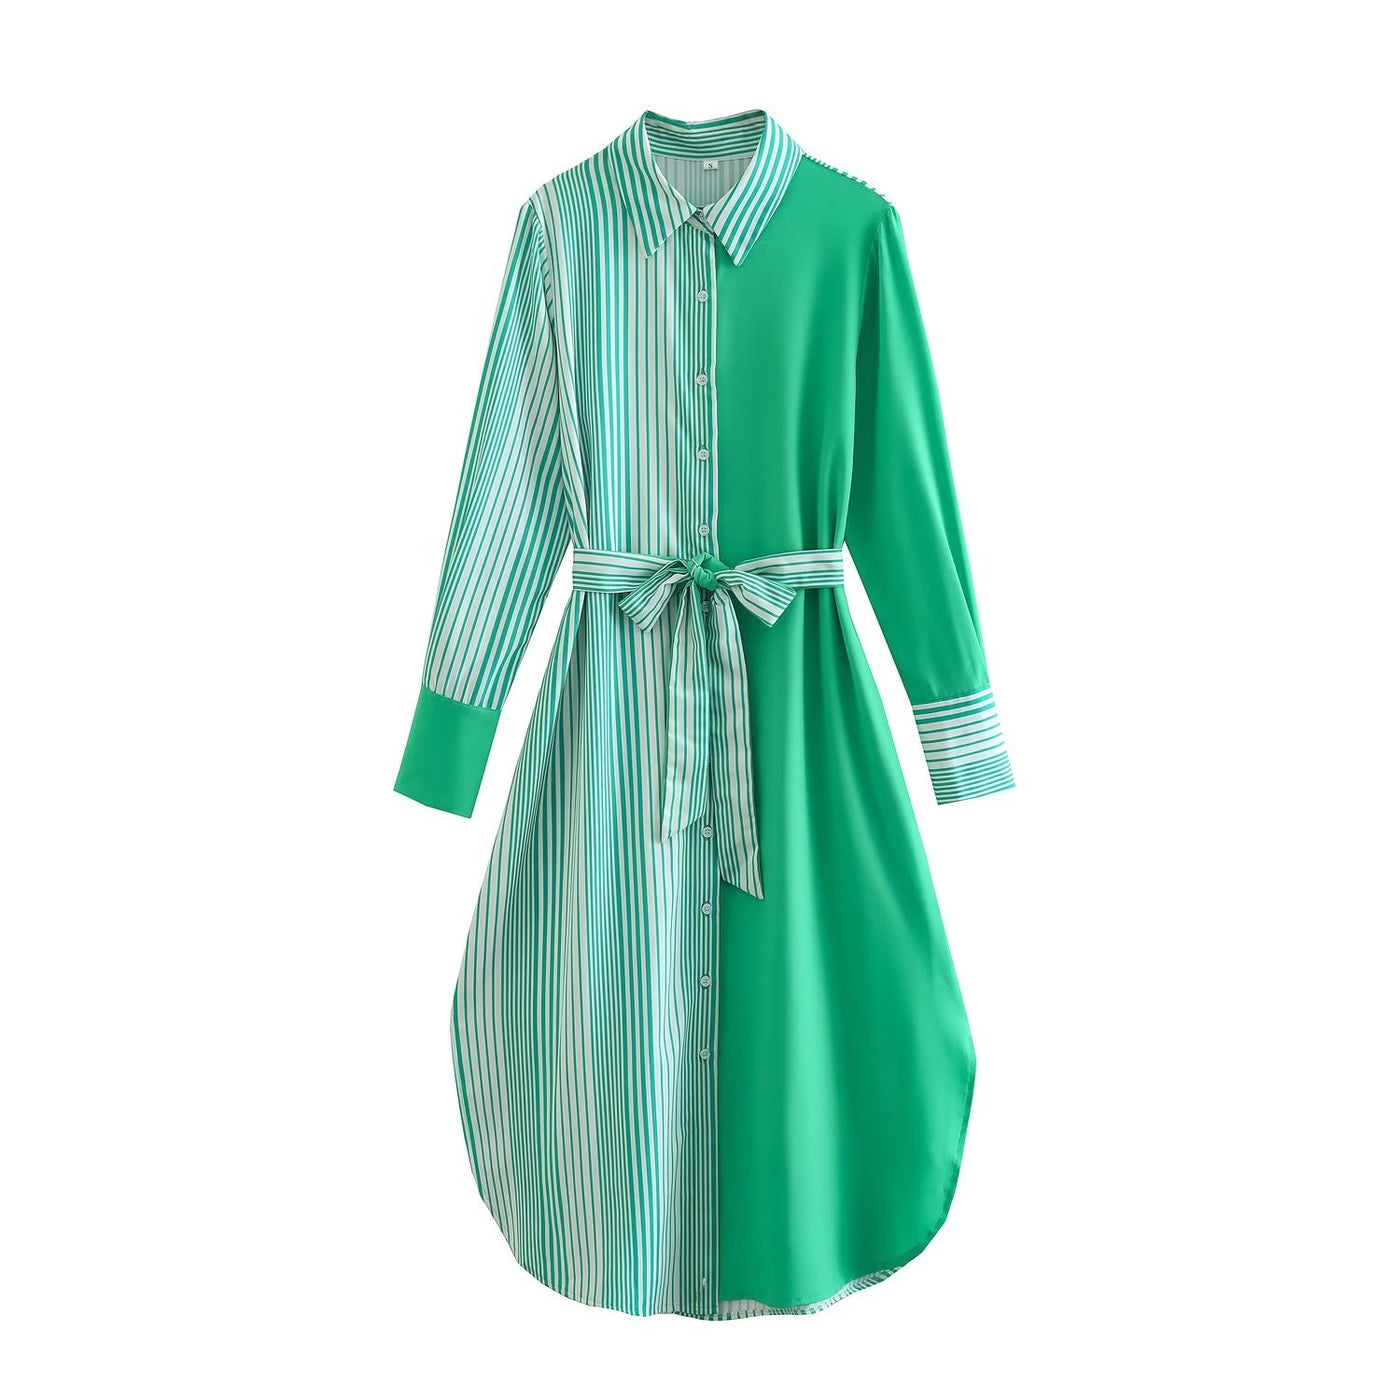 Early Autumn Gentle Elegant Collared Long Sleeve Shirt Striped Lace up Dress for Women